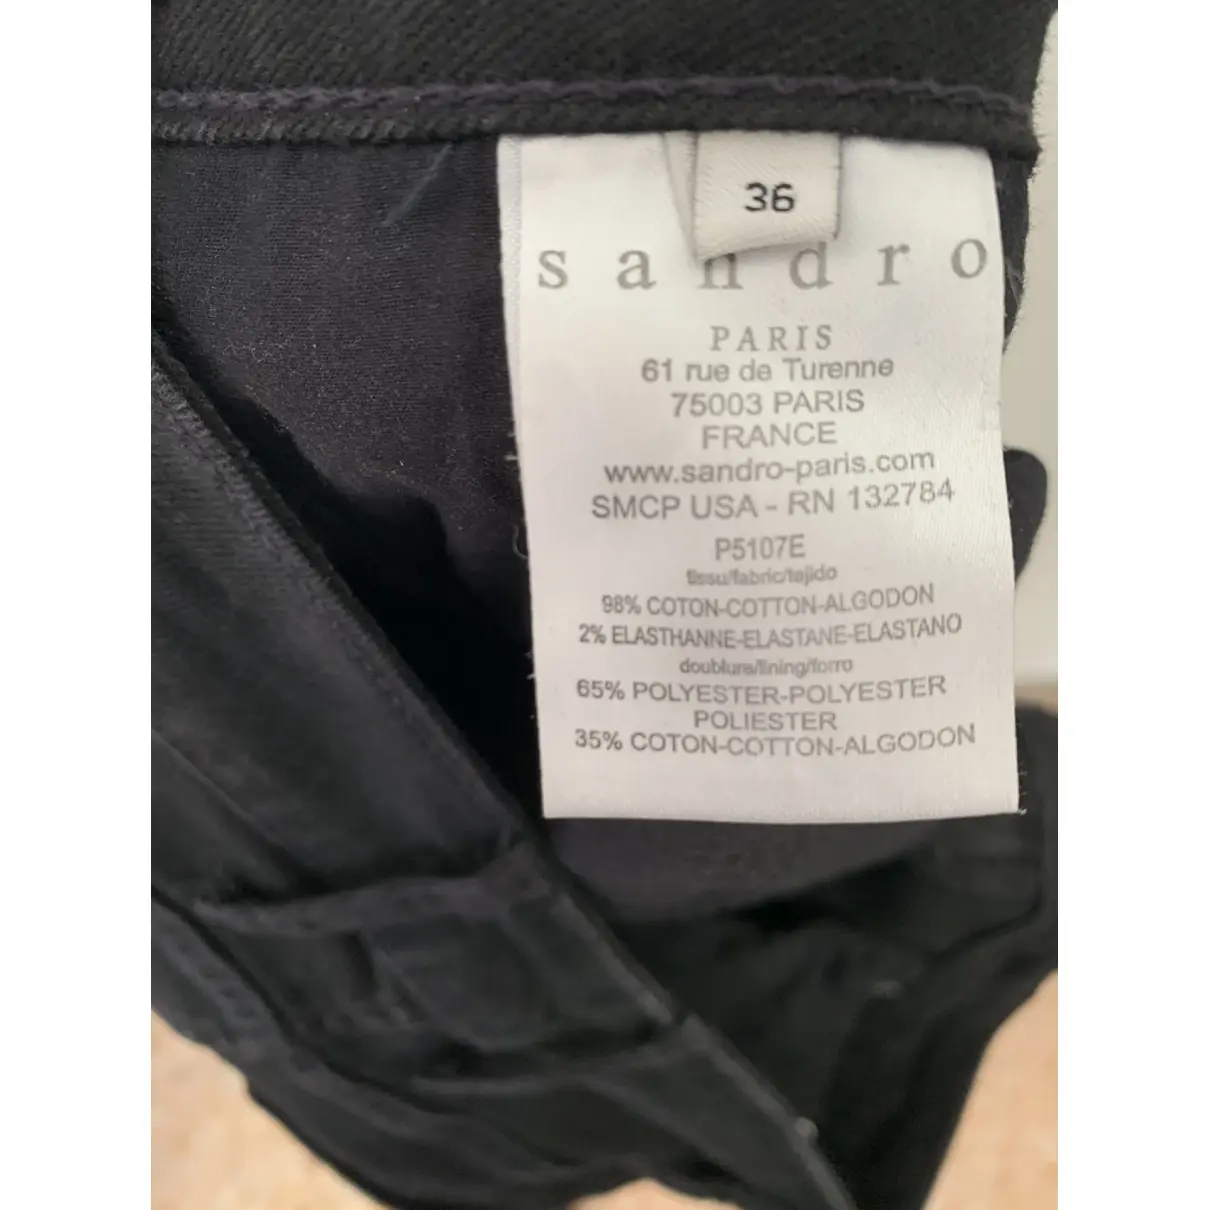 Buy Sandro Fall Winter 2019 bootcut jeans online